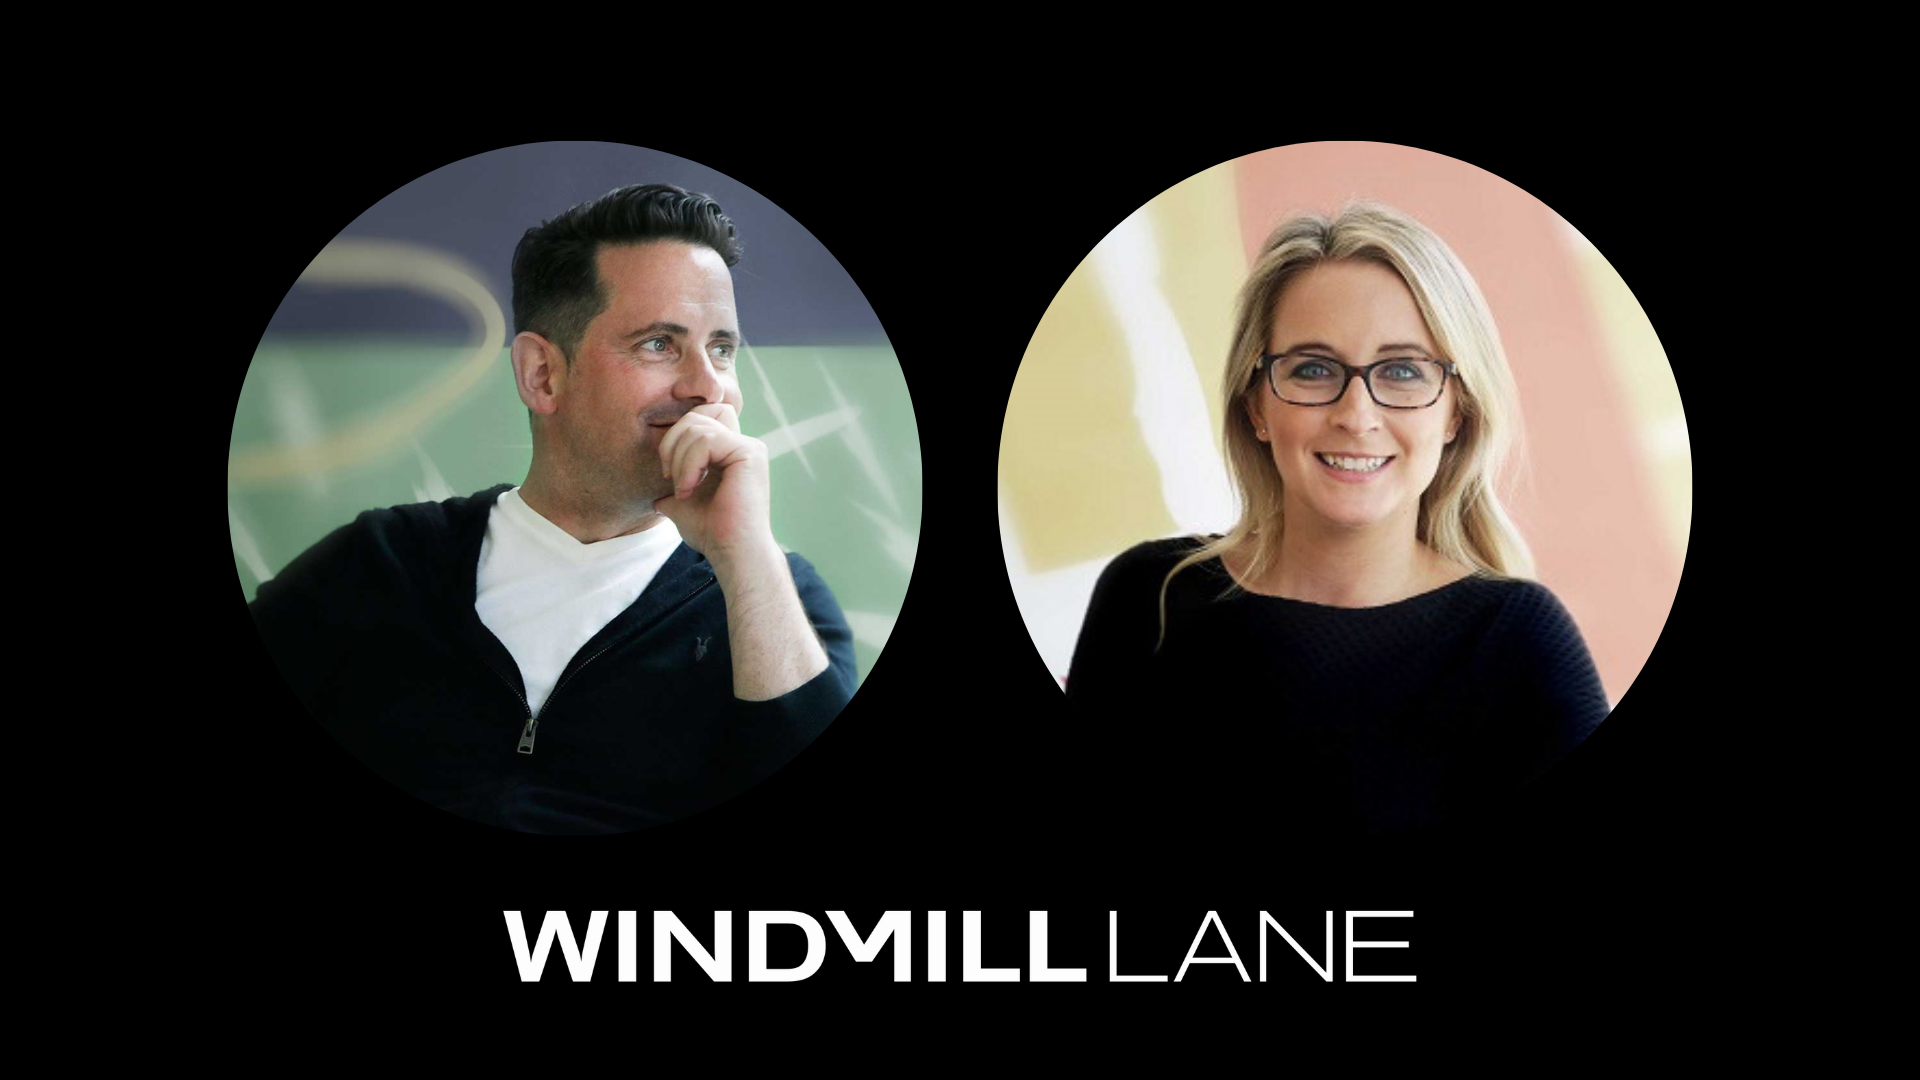 Windmill Lane – The 45 Year Old Start-Up